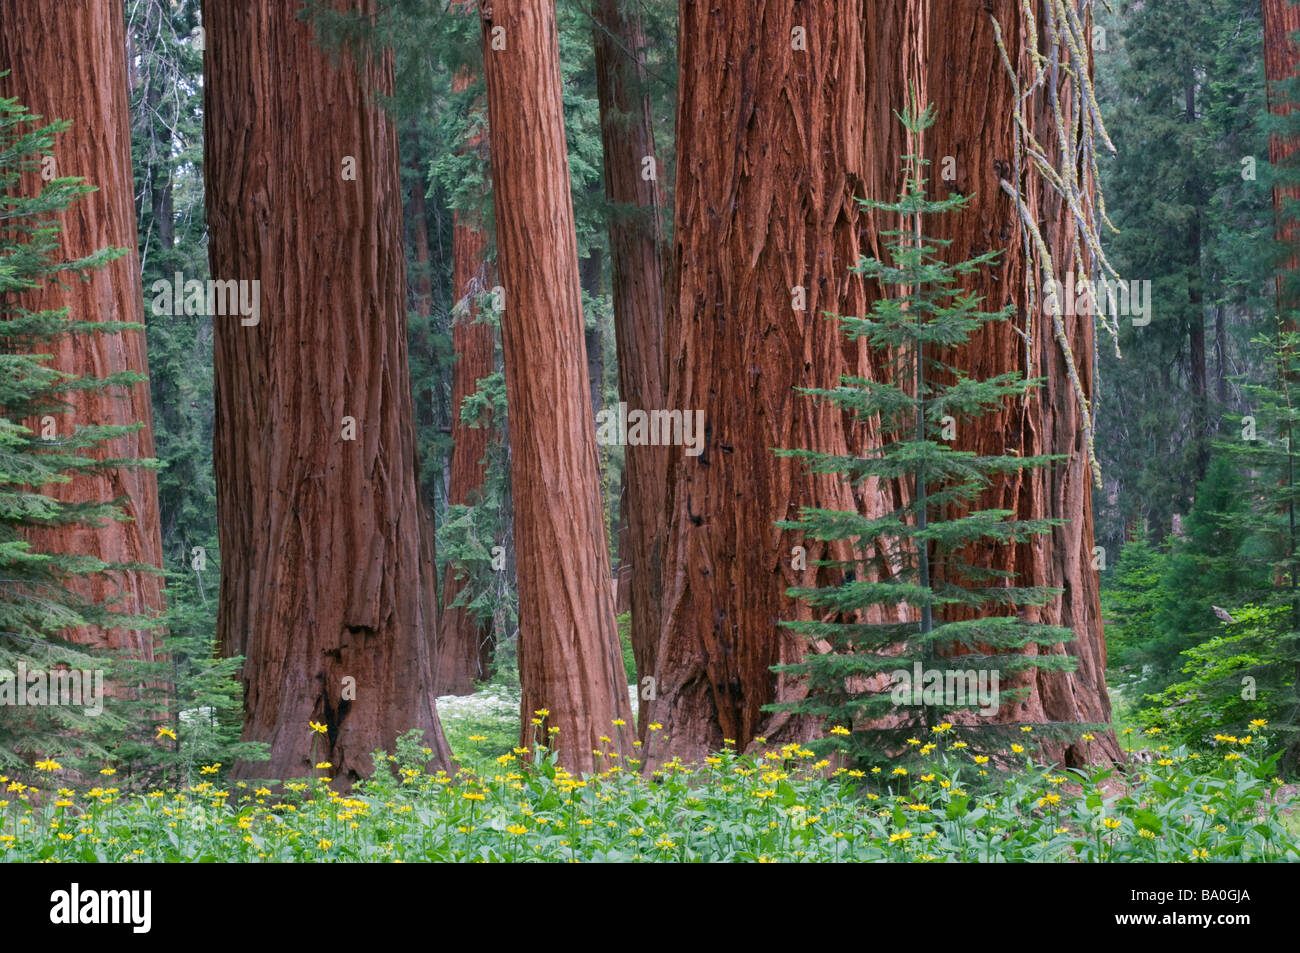 Giant Sequoia trees in the forest Sequoia and Kings Canyon National Park California USA Stock Photo